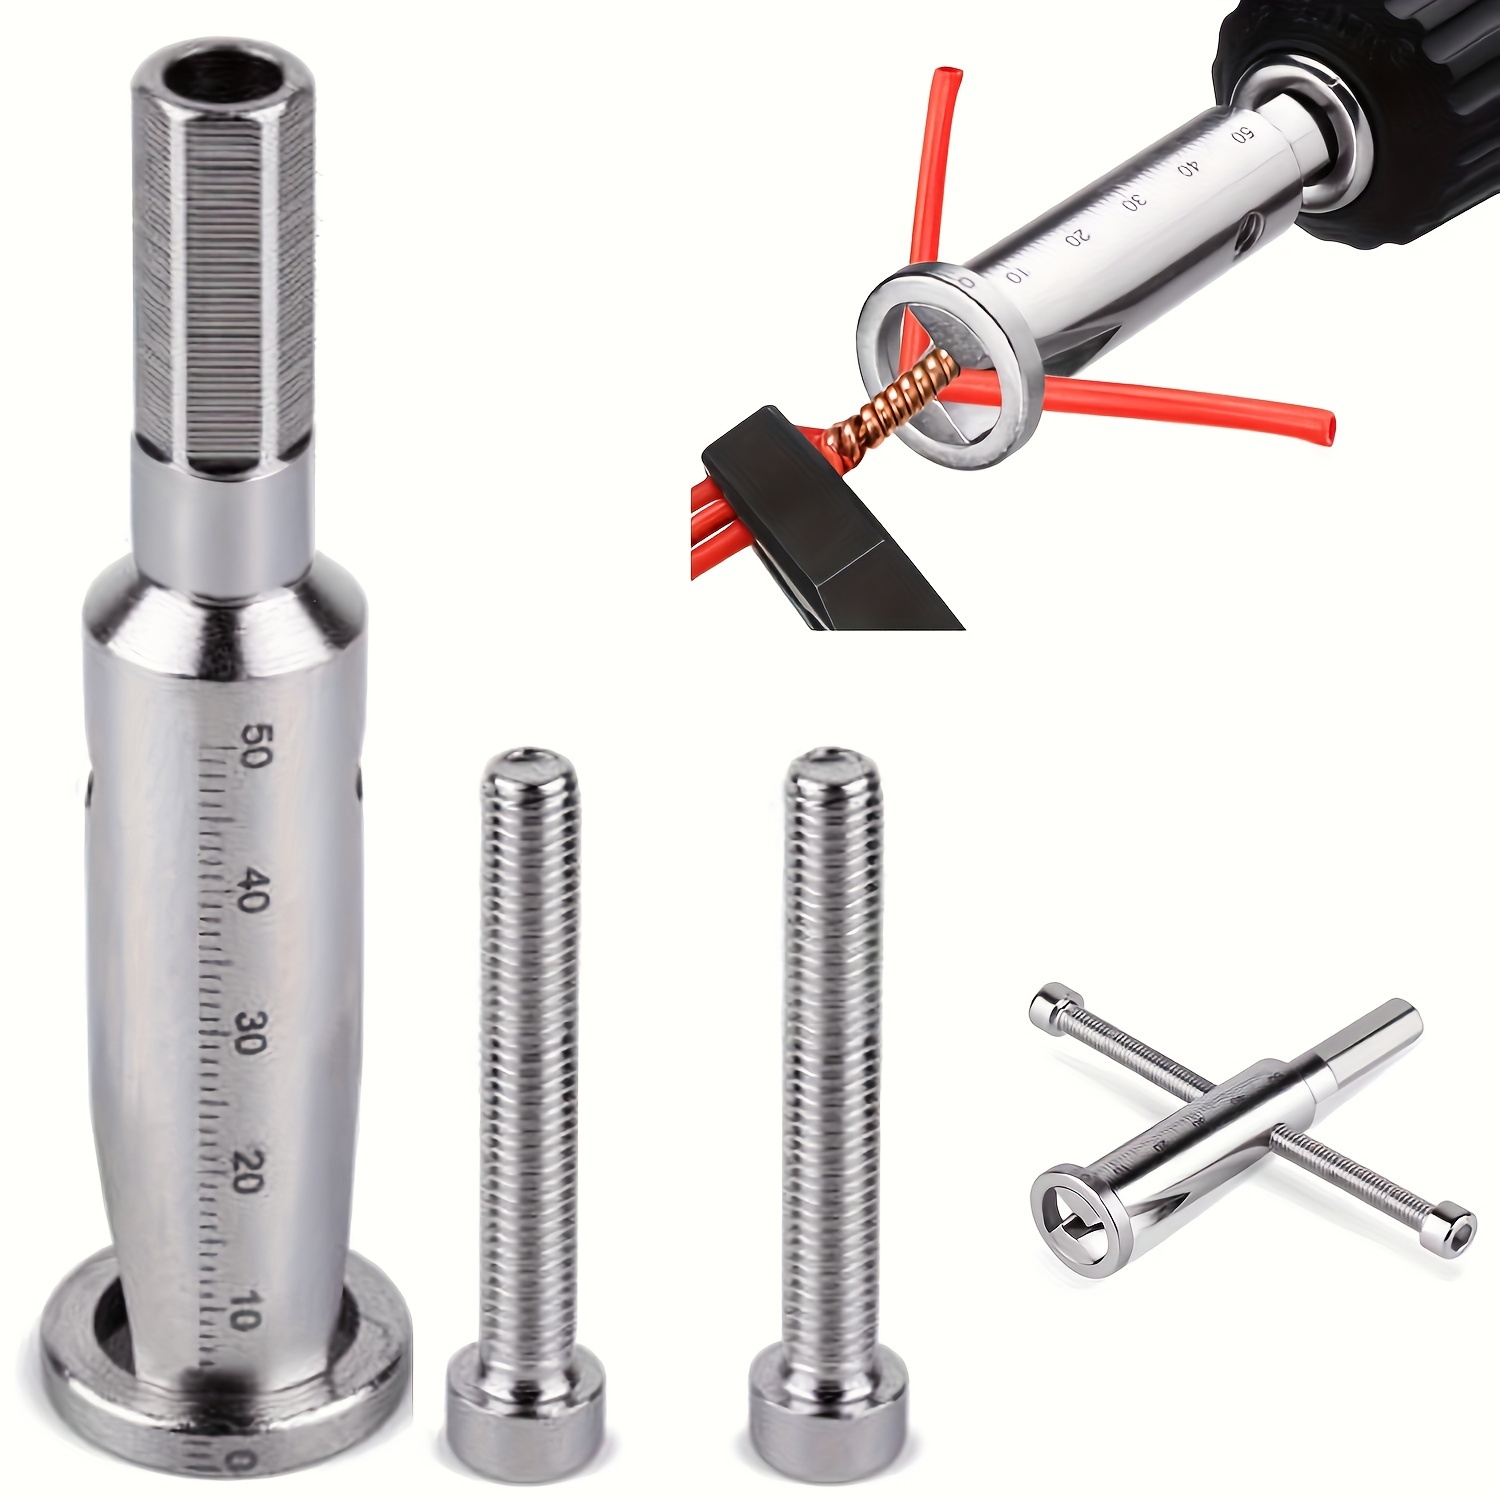 CIVG Wire Twister Wire Nut Driver with 1/4inch Chuck Spin Twisting Wire  Connector Socket High Efficiency Wire Twisting Tool General Wire Nut  Twister for Cordless Electric Drill 